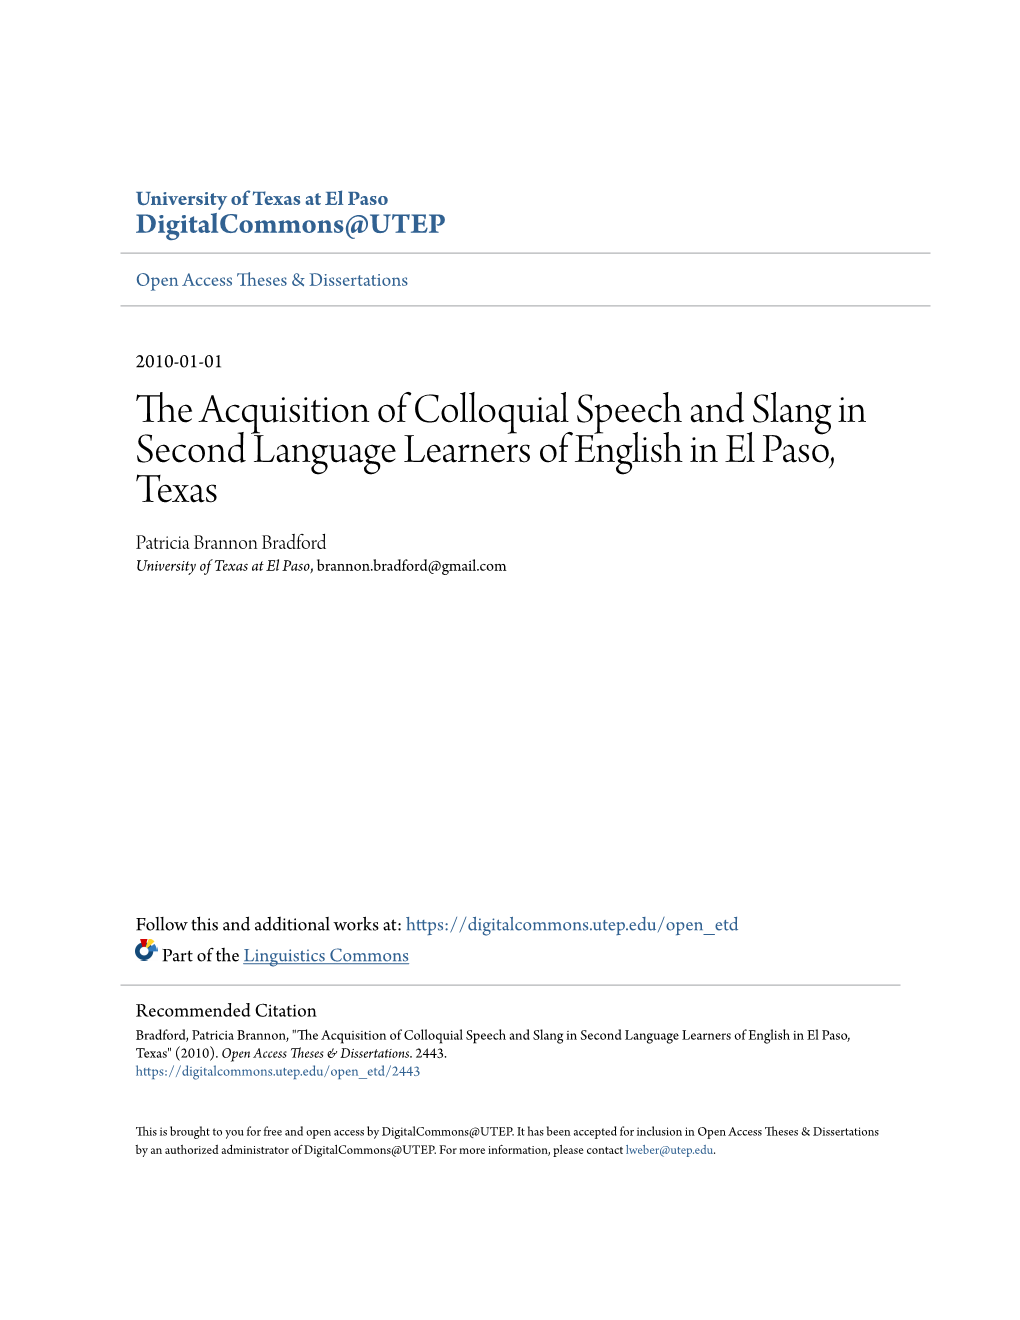 The Acquisition of Colloquial Speech and Slang in Second Language